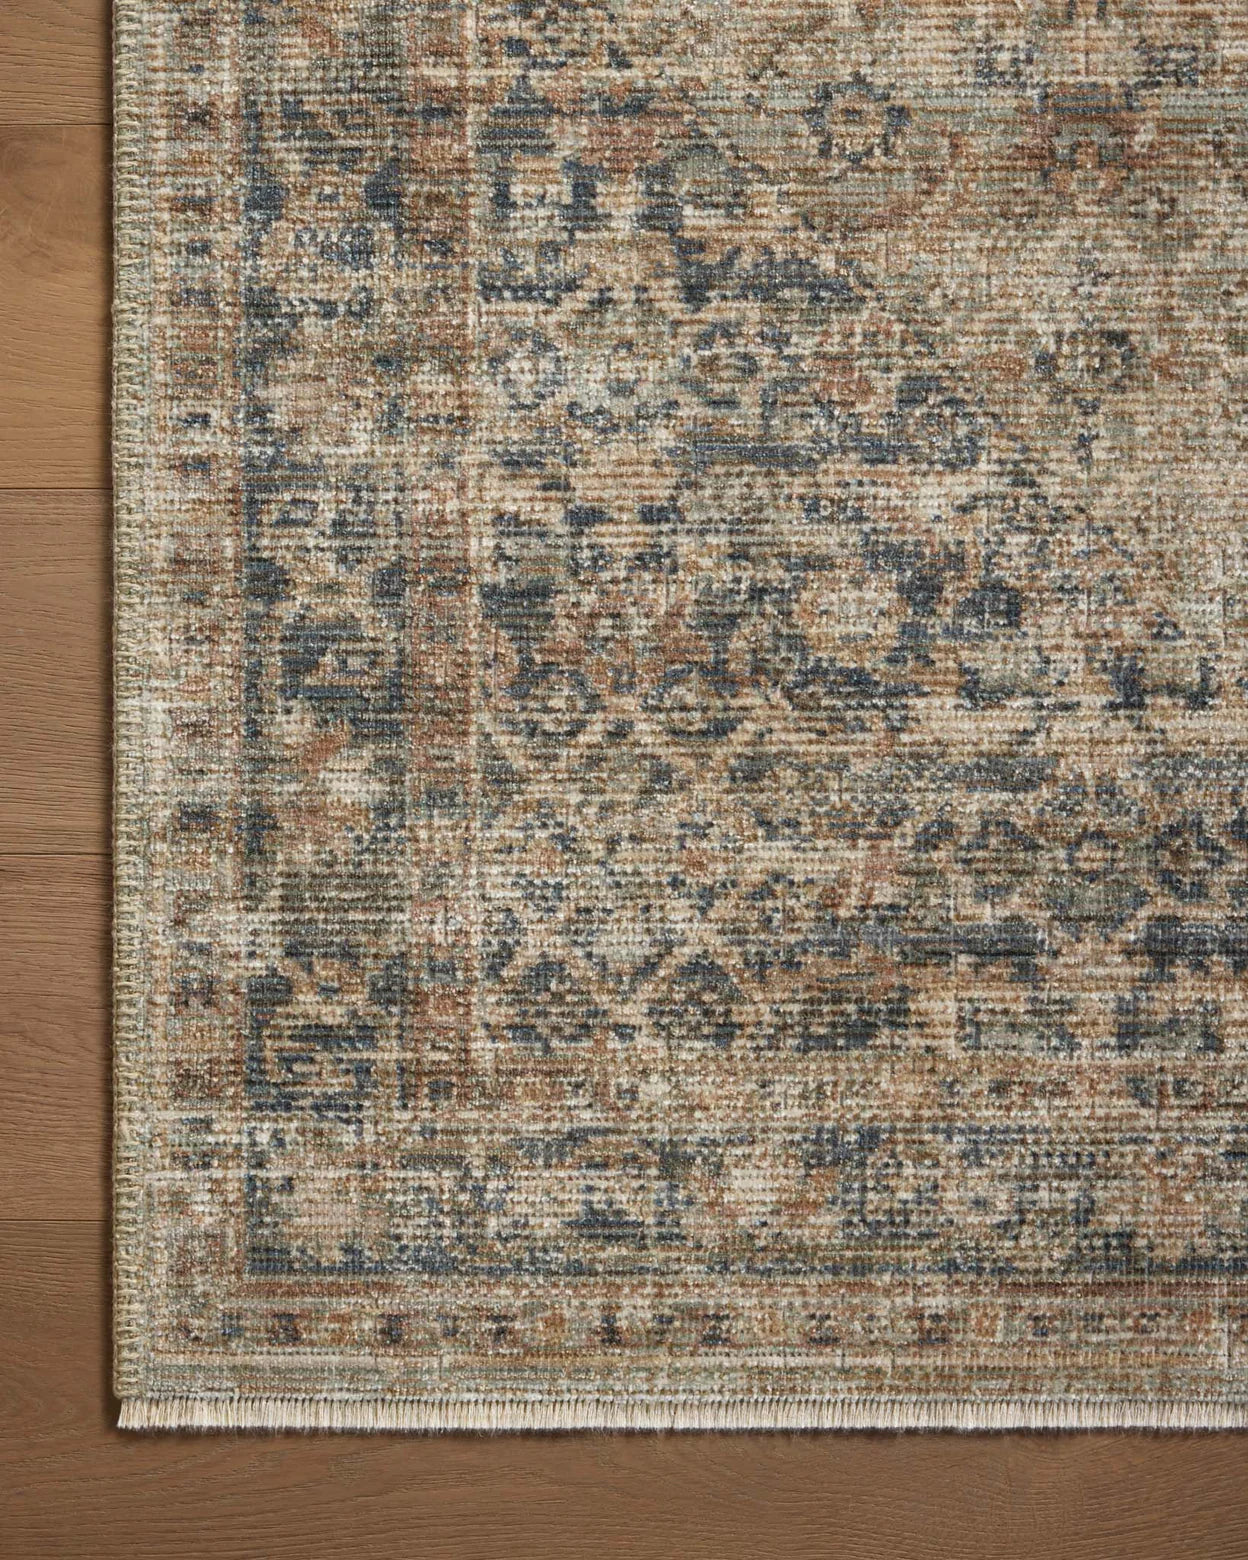 A close-up view of a Sage / Navy Rug by Loloi Rugs with a detailed, vintage-style pattern in muted shades of blues, browns, and creams, displayed on a wooden floor in a Scottsdale Arizona bungalow.